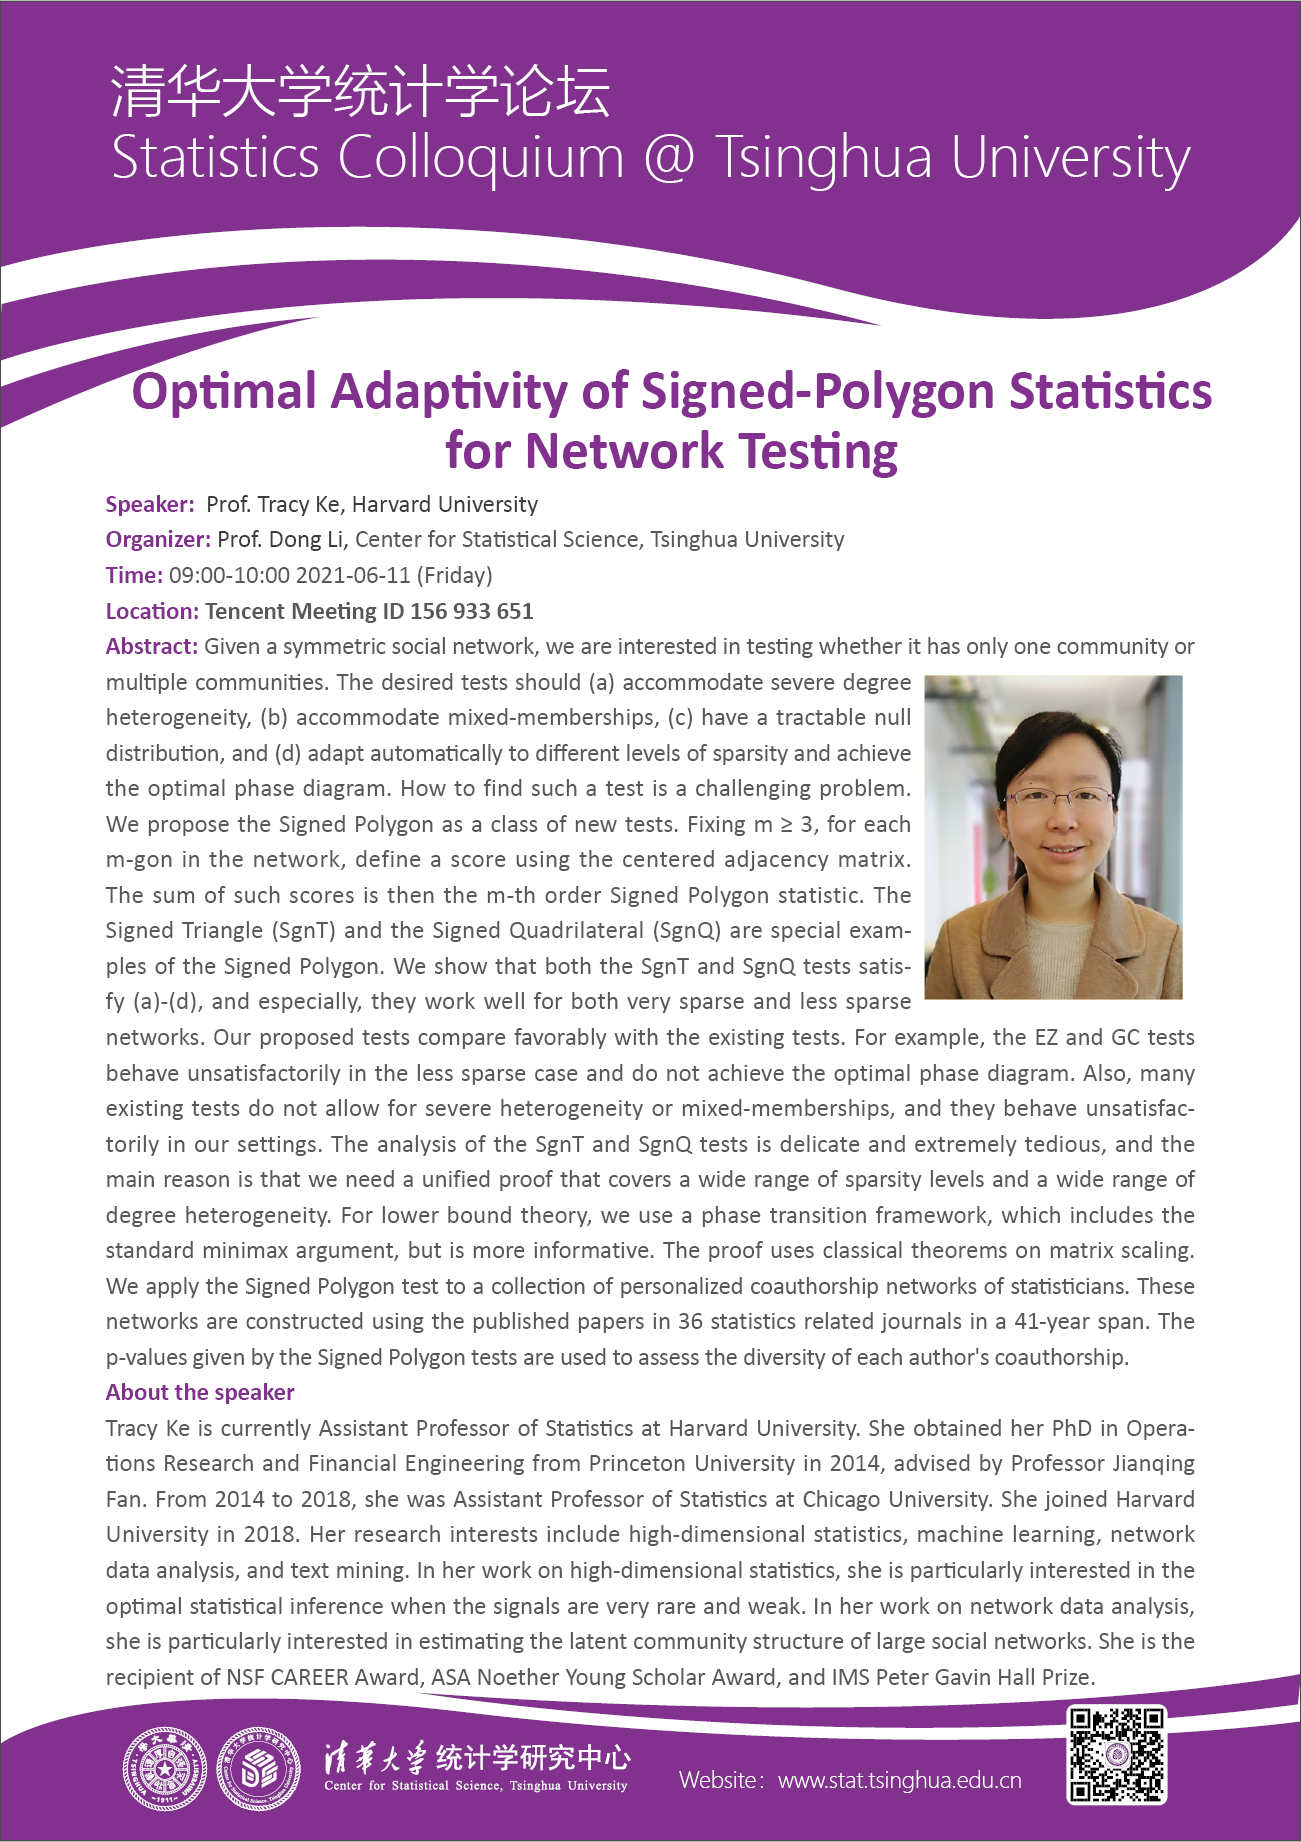 Optimal Adaptivity of Signed-Polygon Statistics for Network Testing